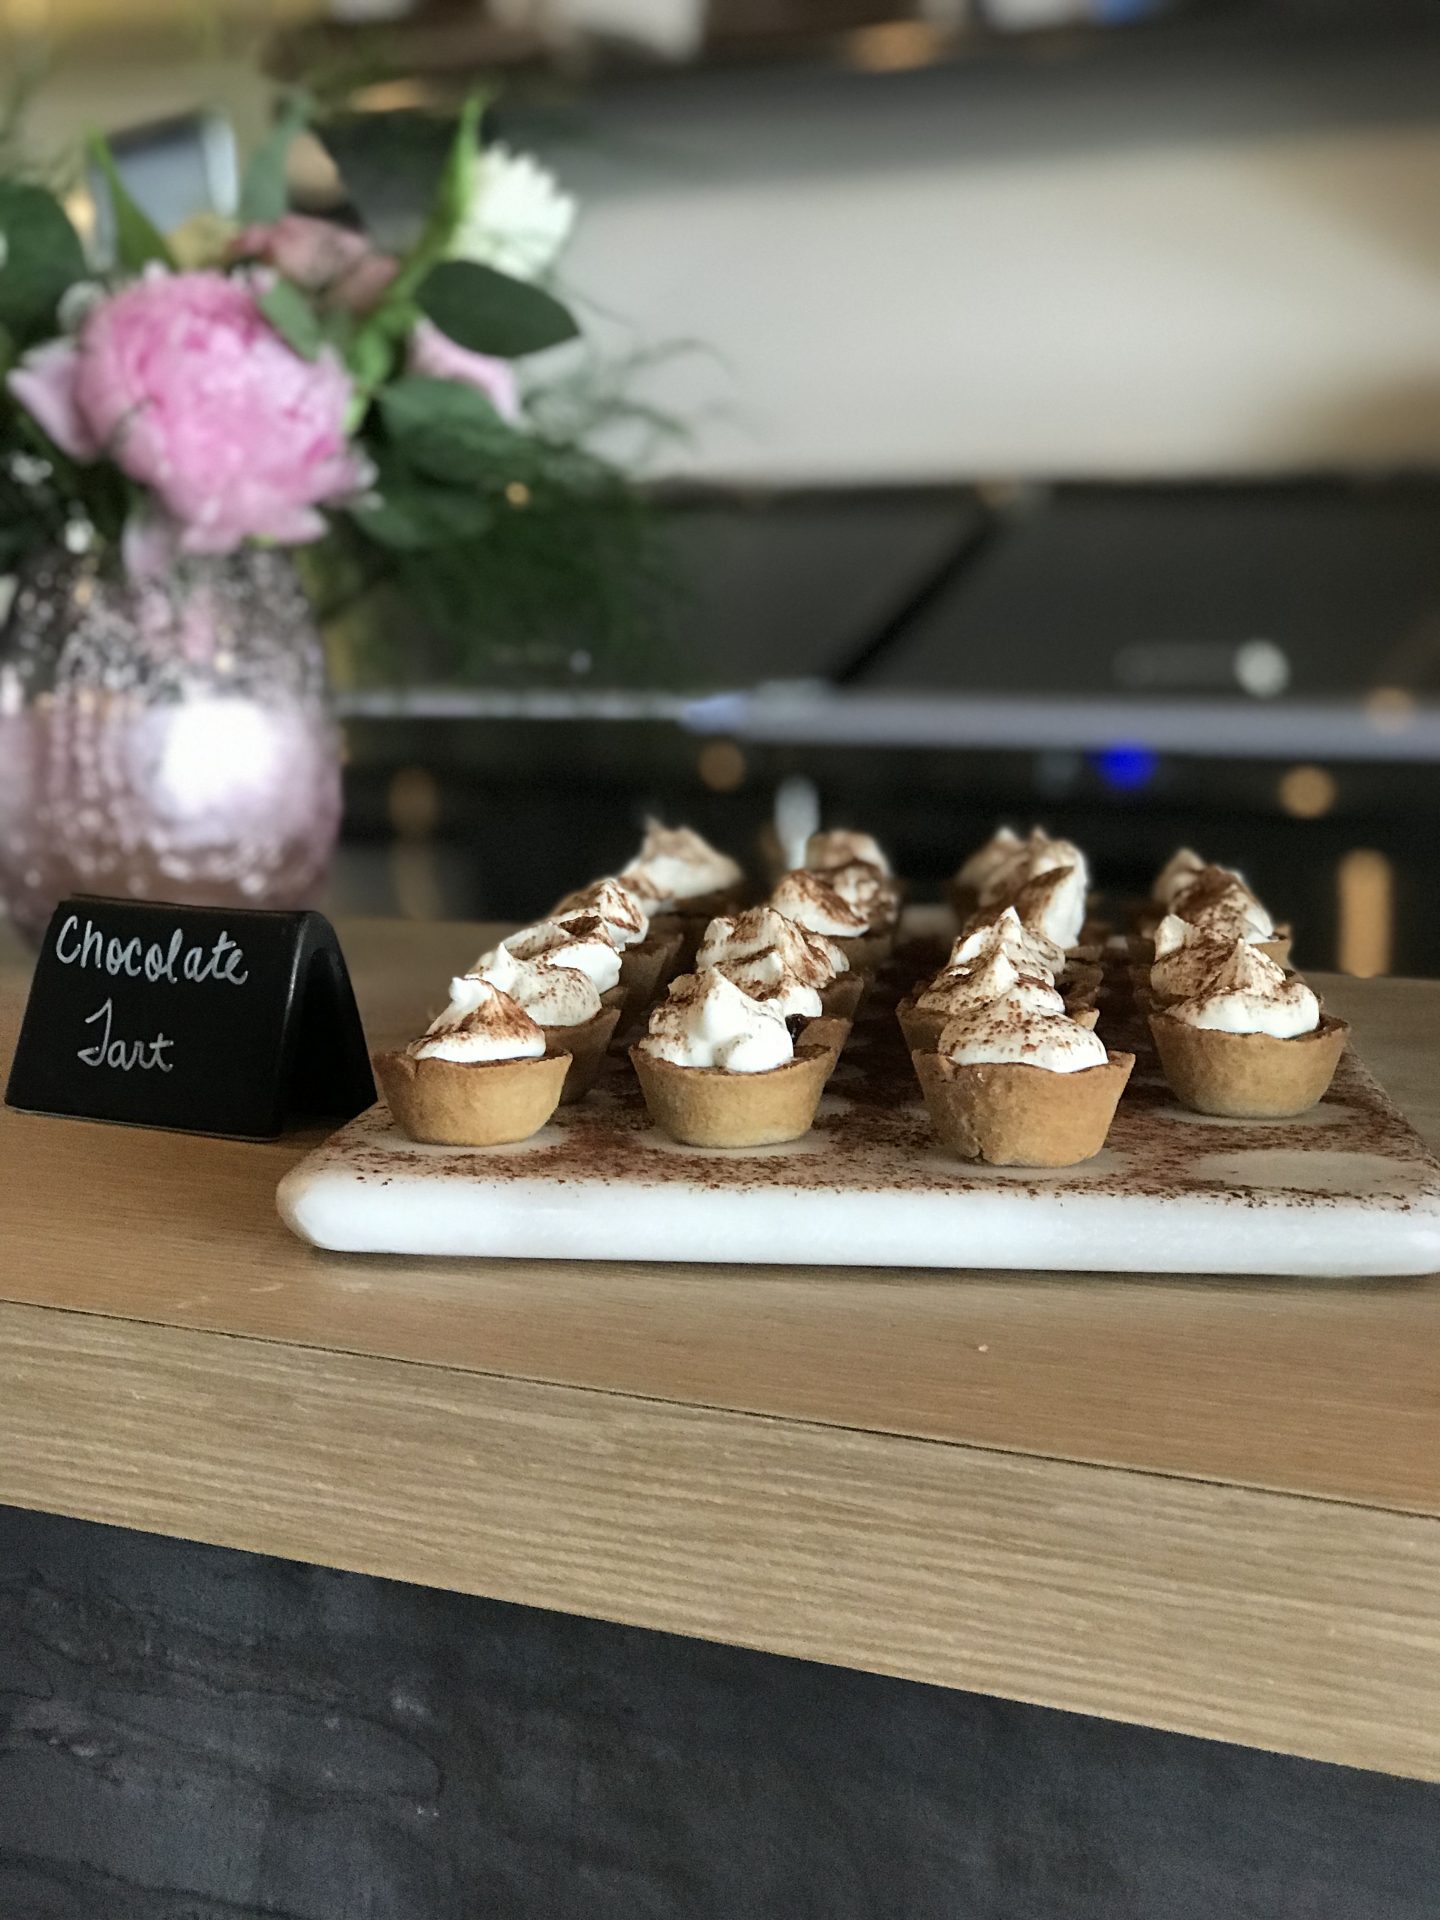 Desserts on a wooden counter